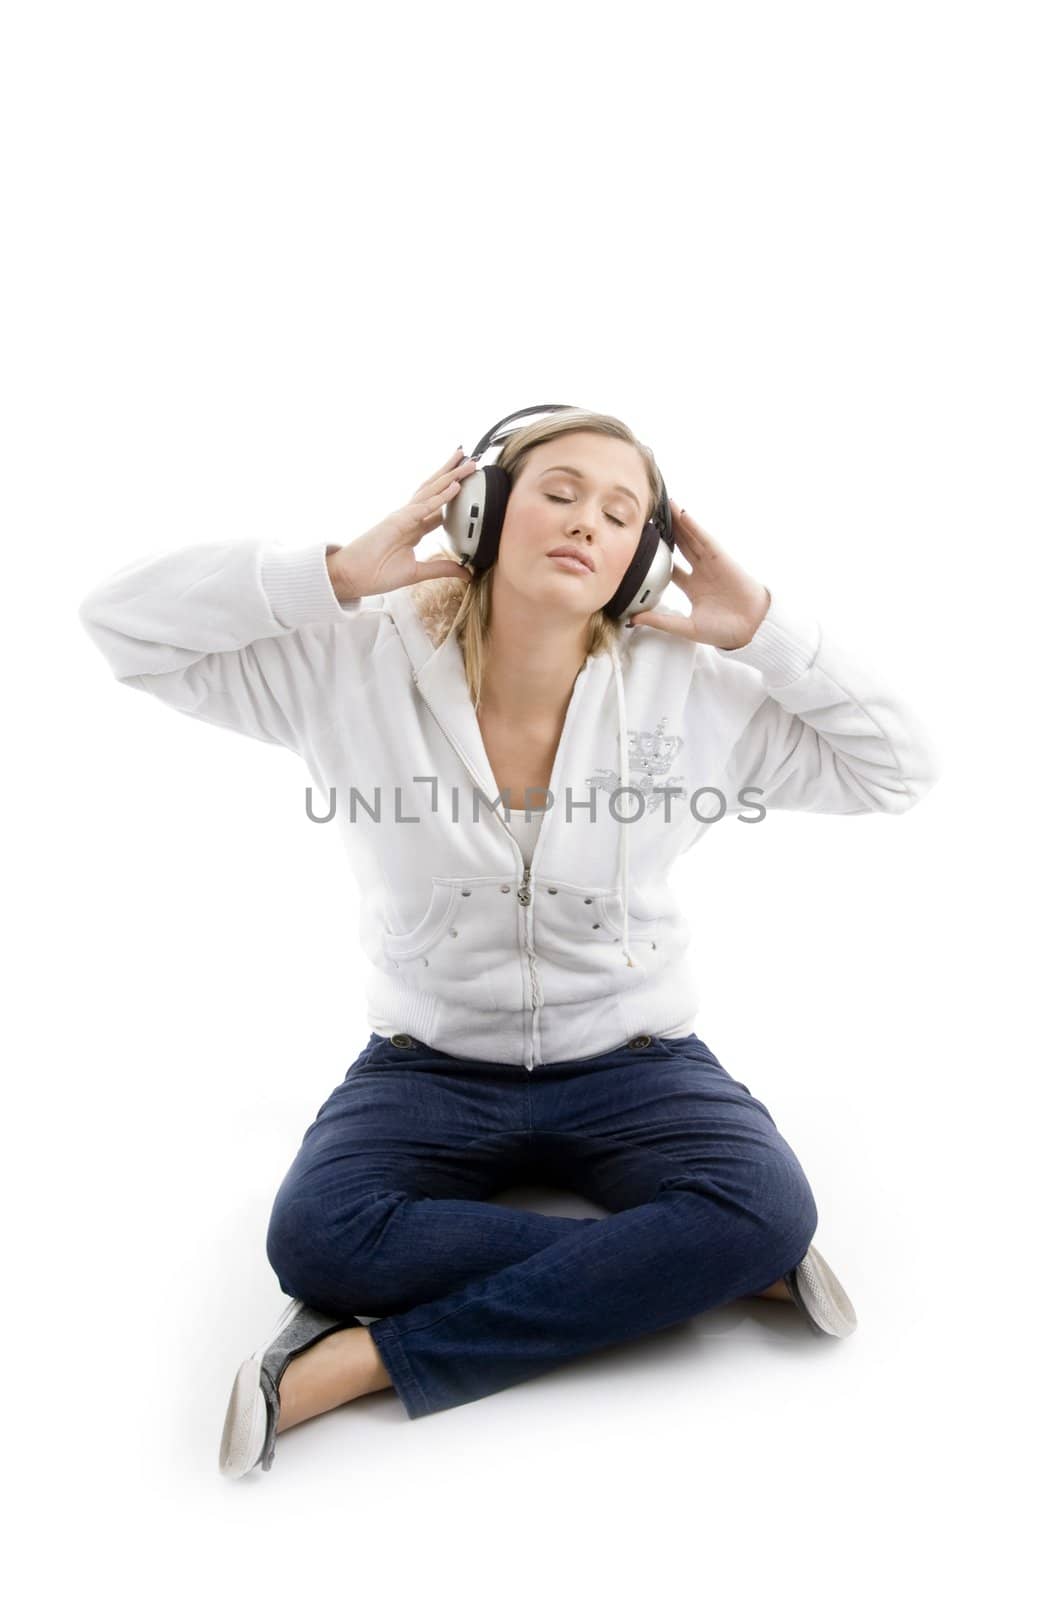 young model listening music with headphones against white background